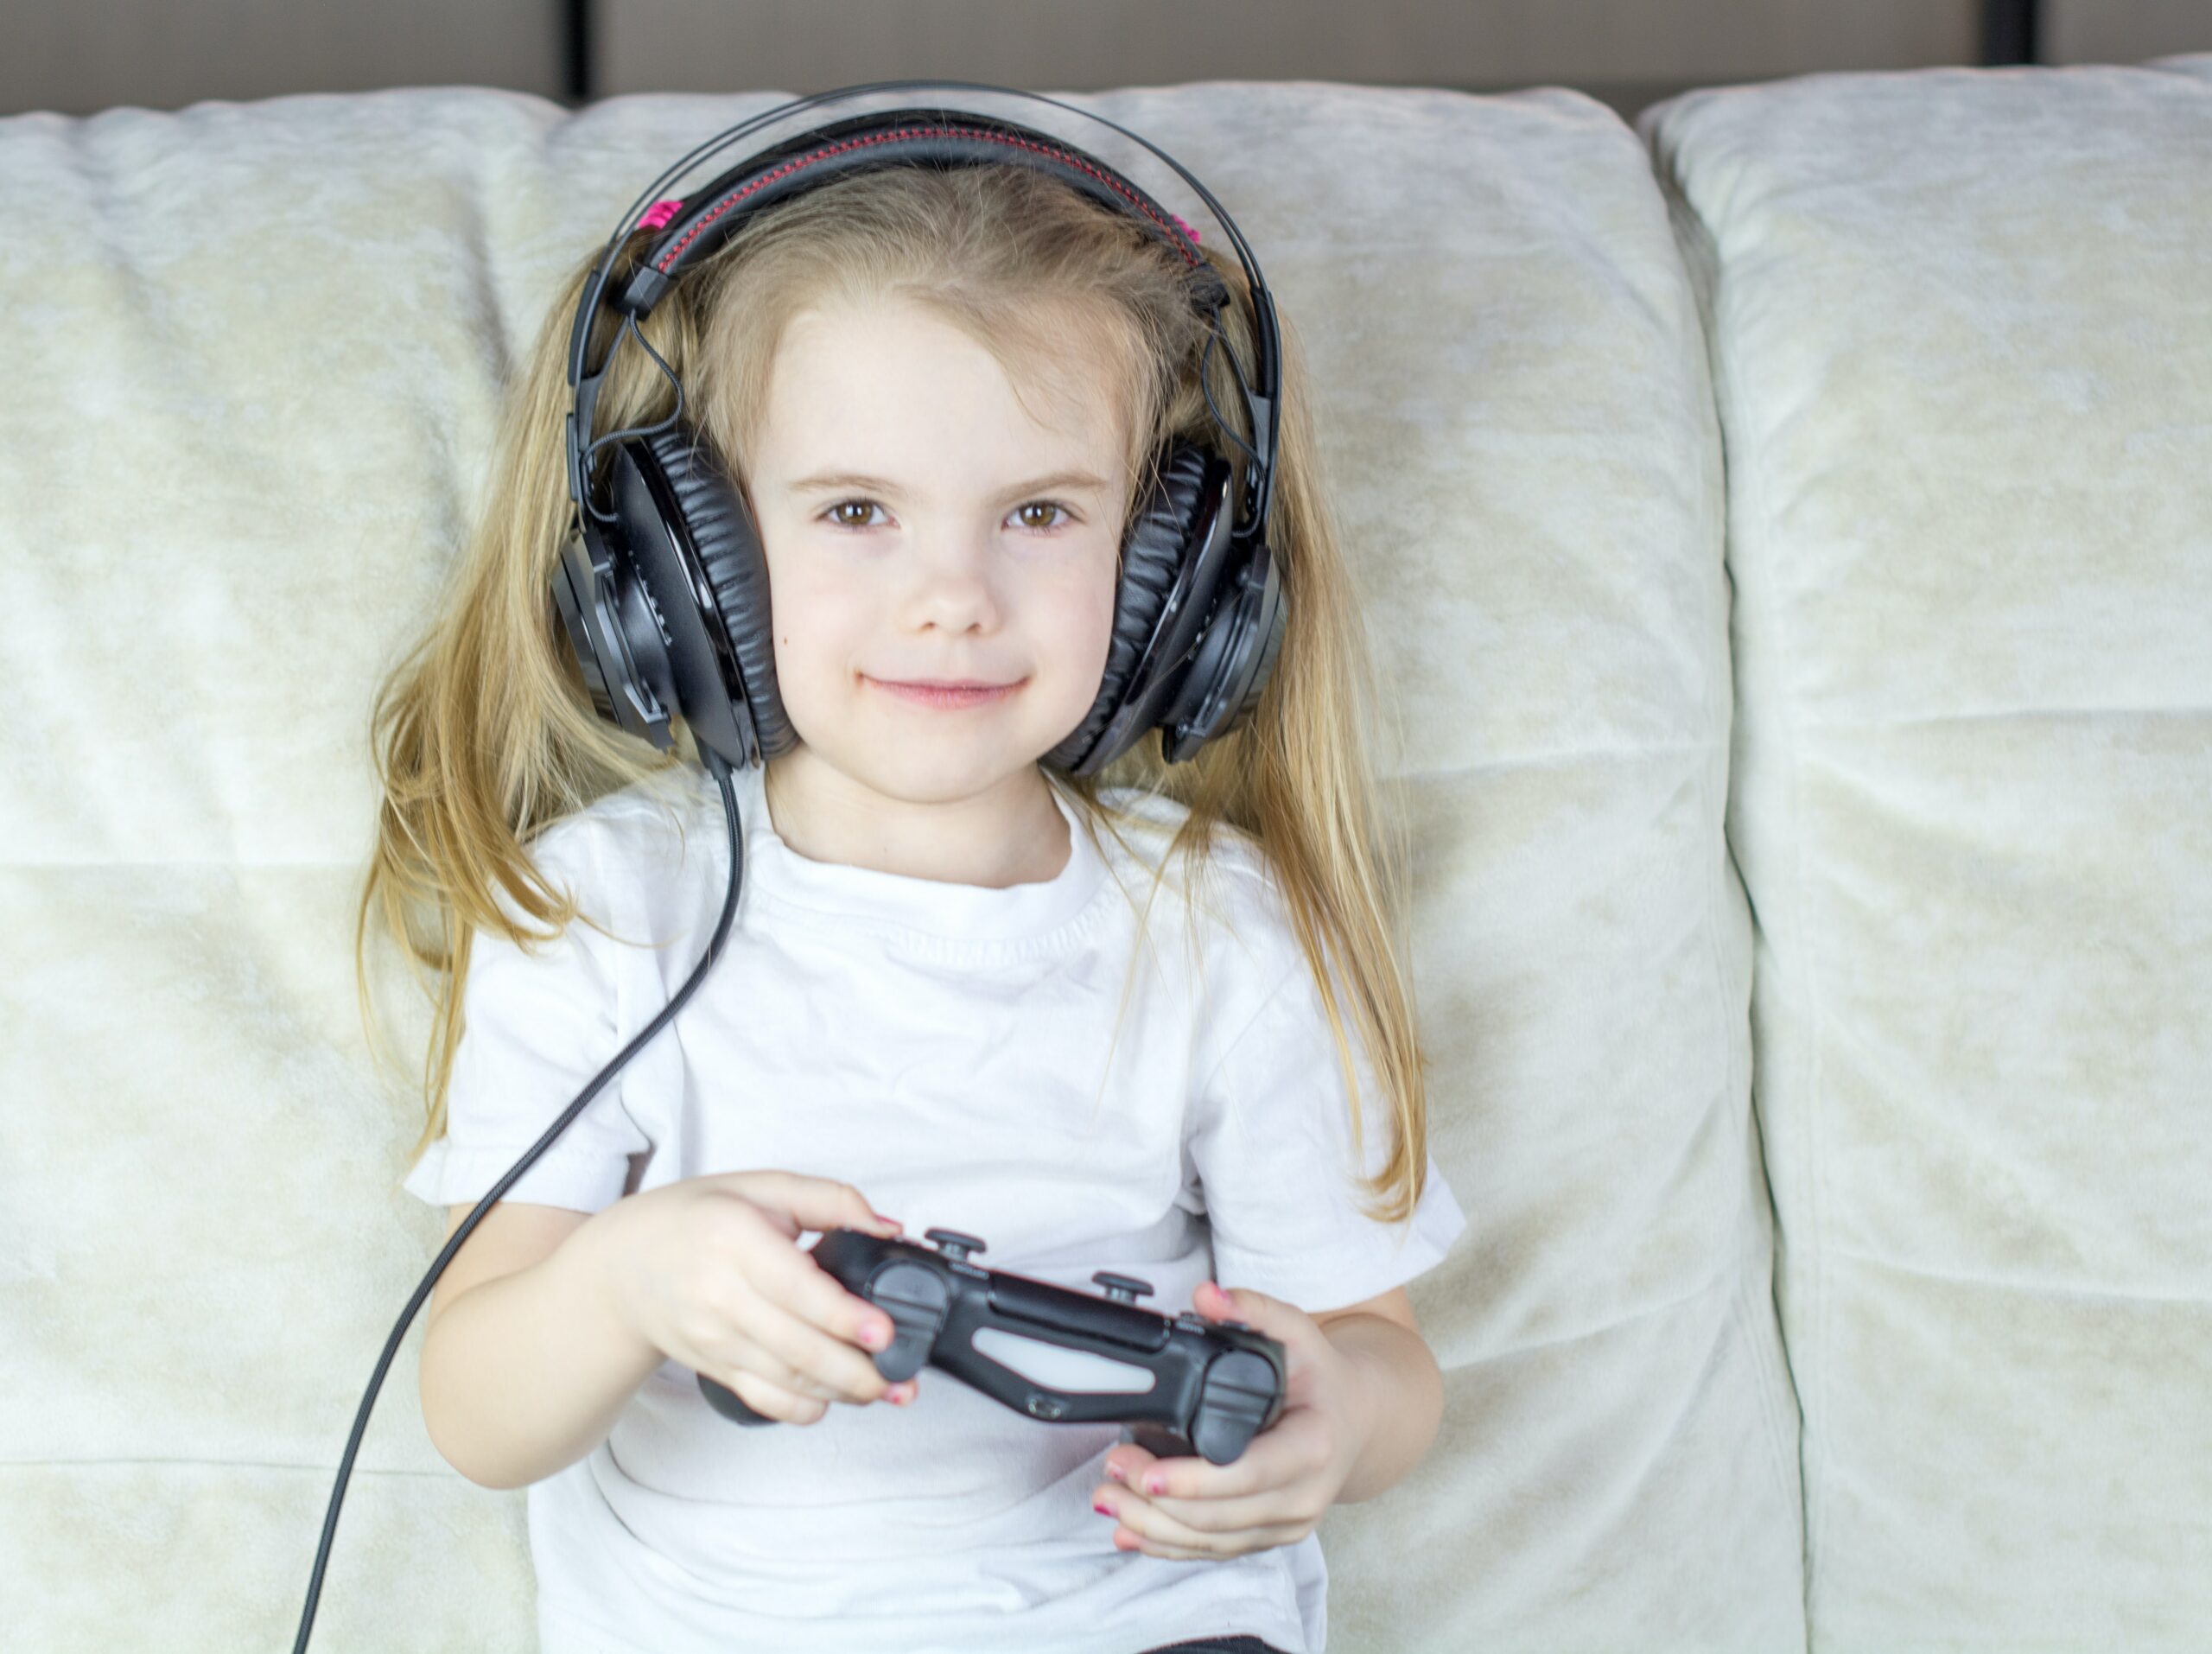 A child with headphones playing video games